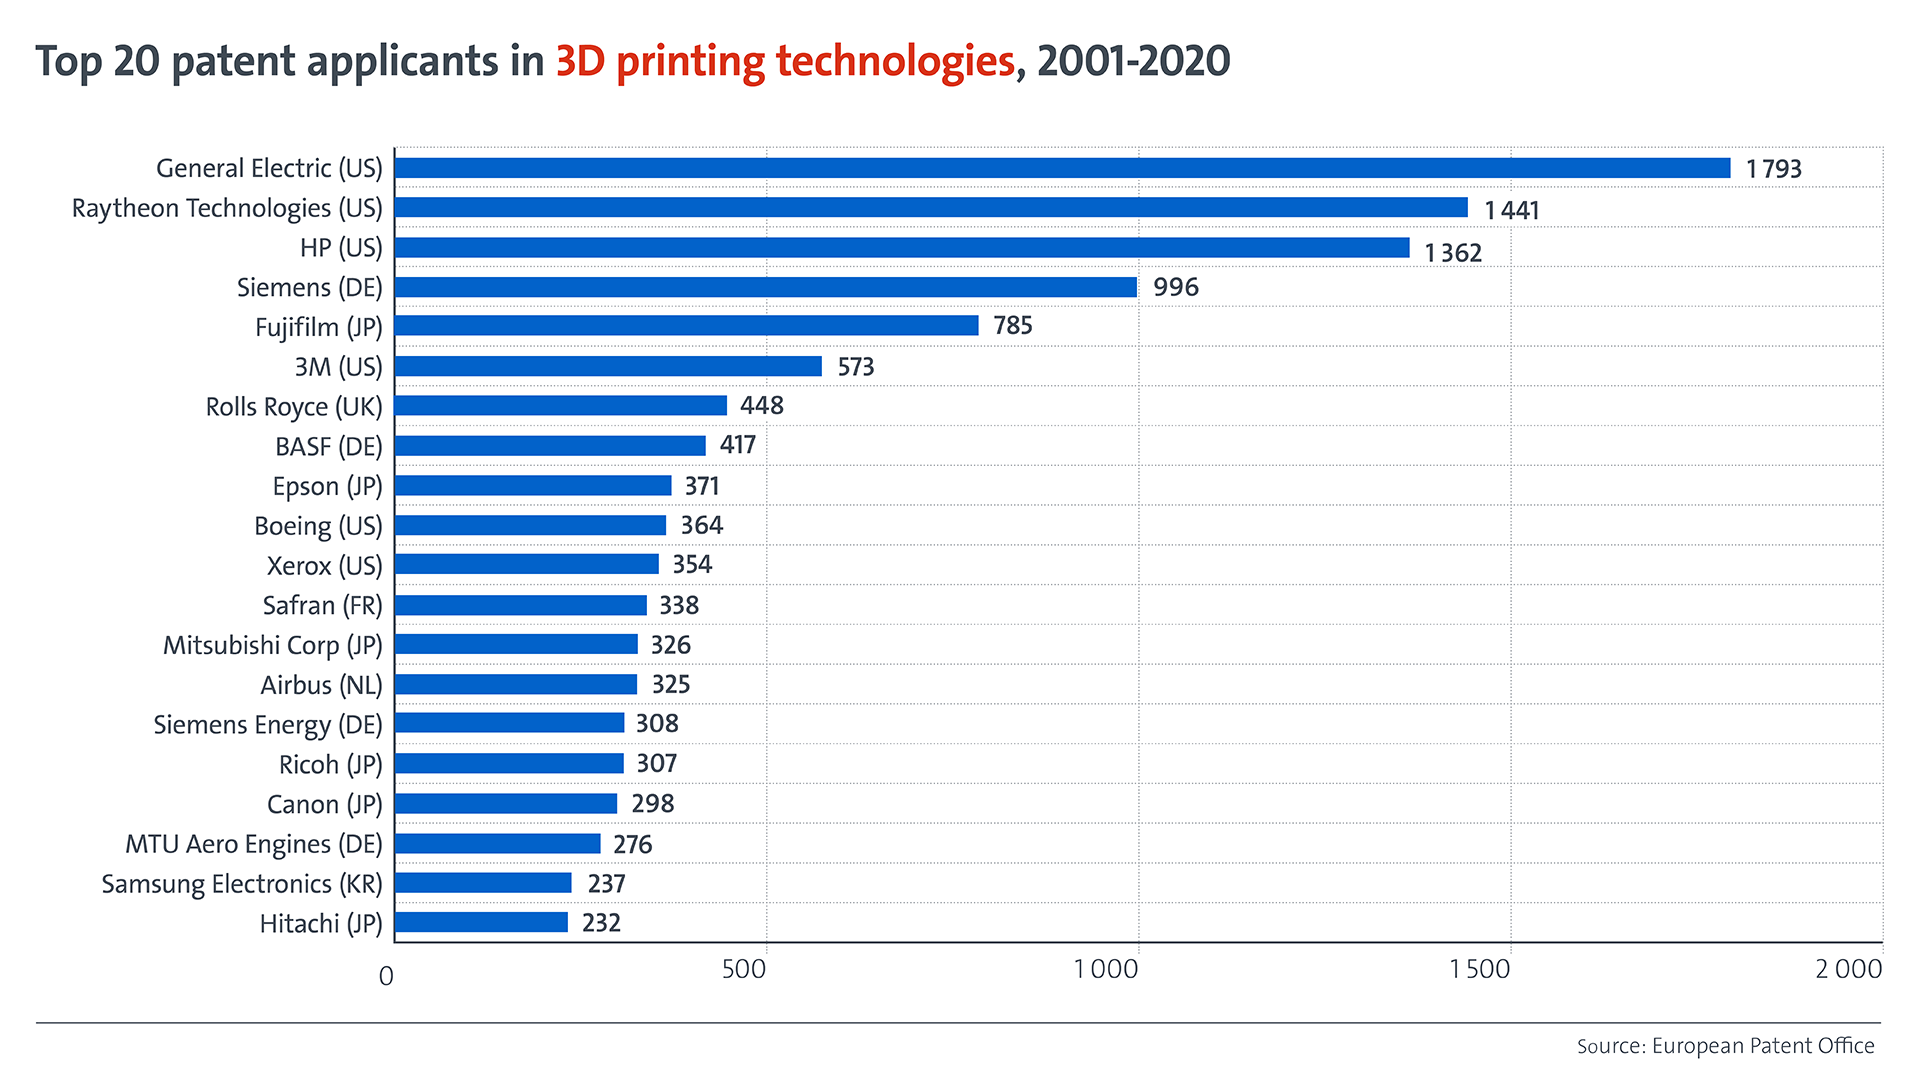 Top applicants in 3D printing technologies